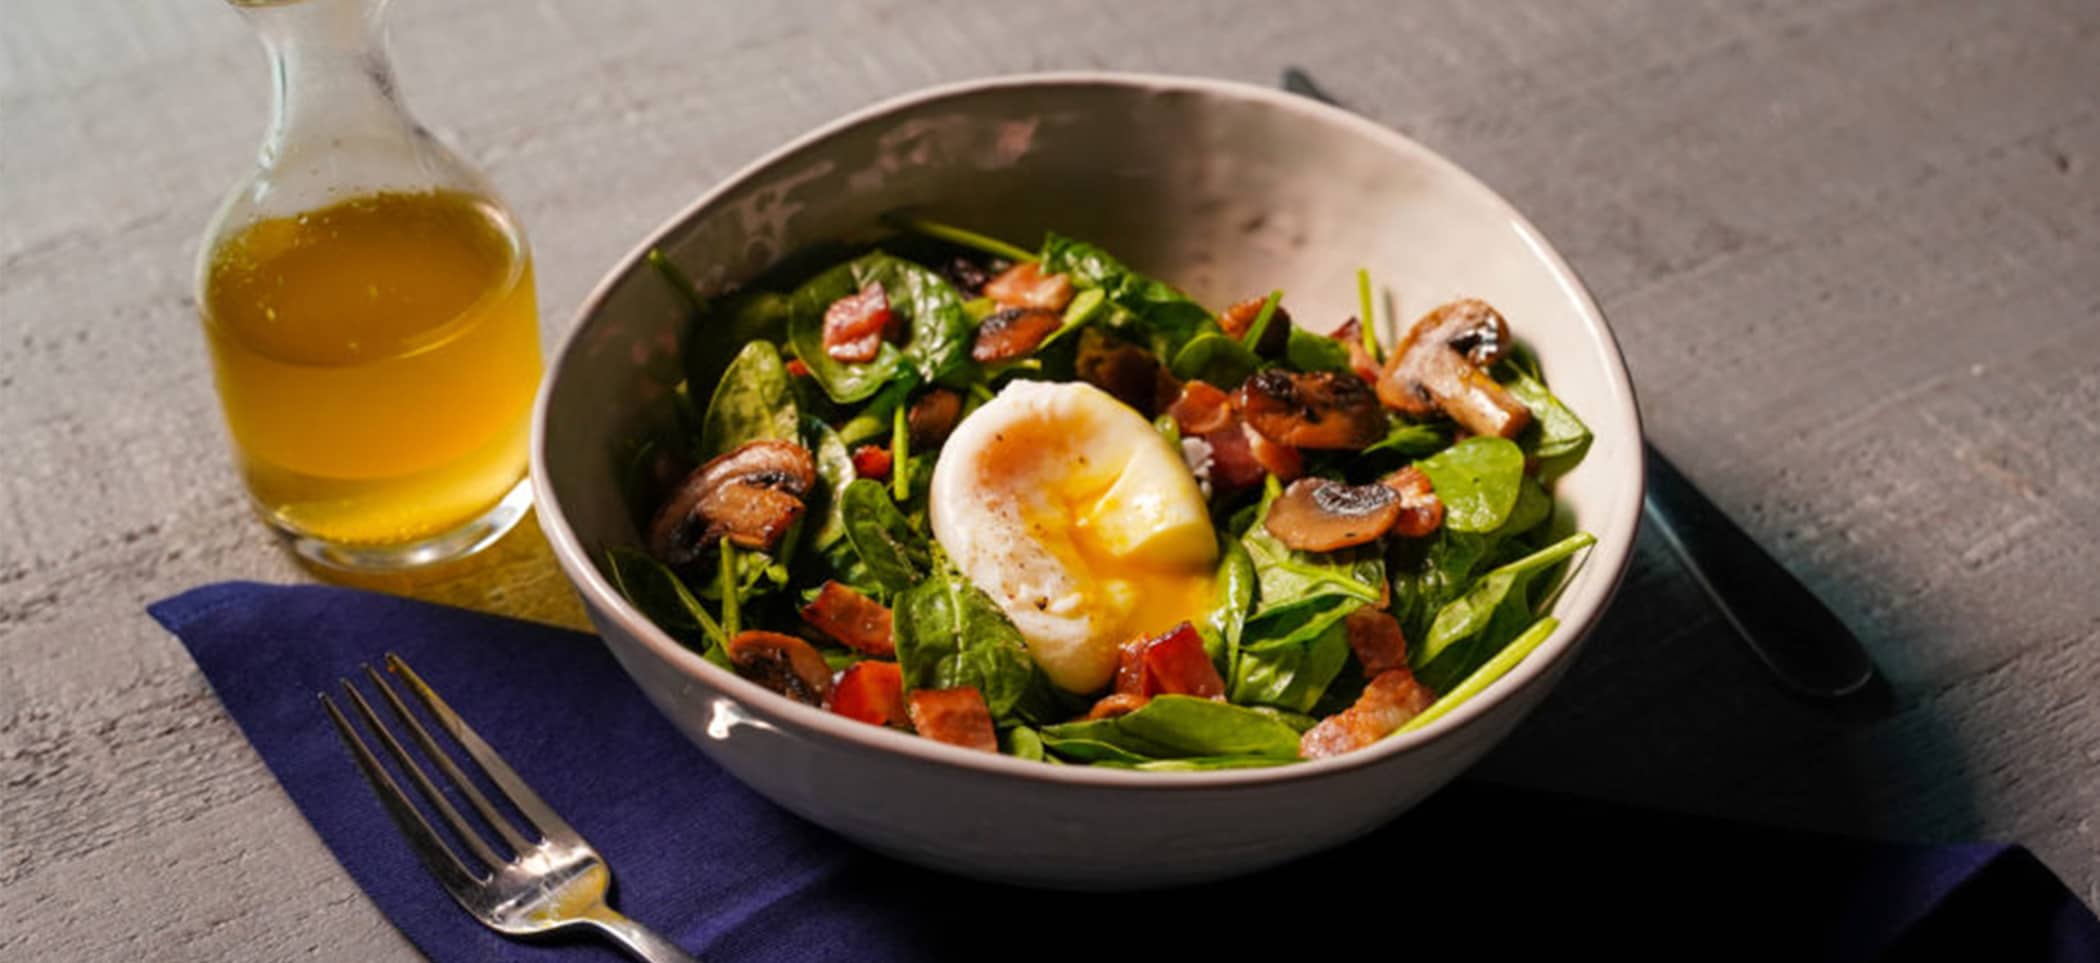 Spinach Salad with Bacon, Mushrooms, Poached Eggs and Bacon Vinaigrette